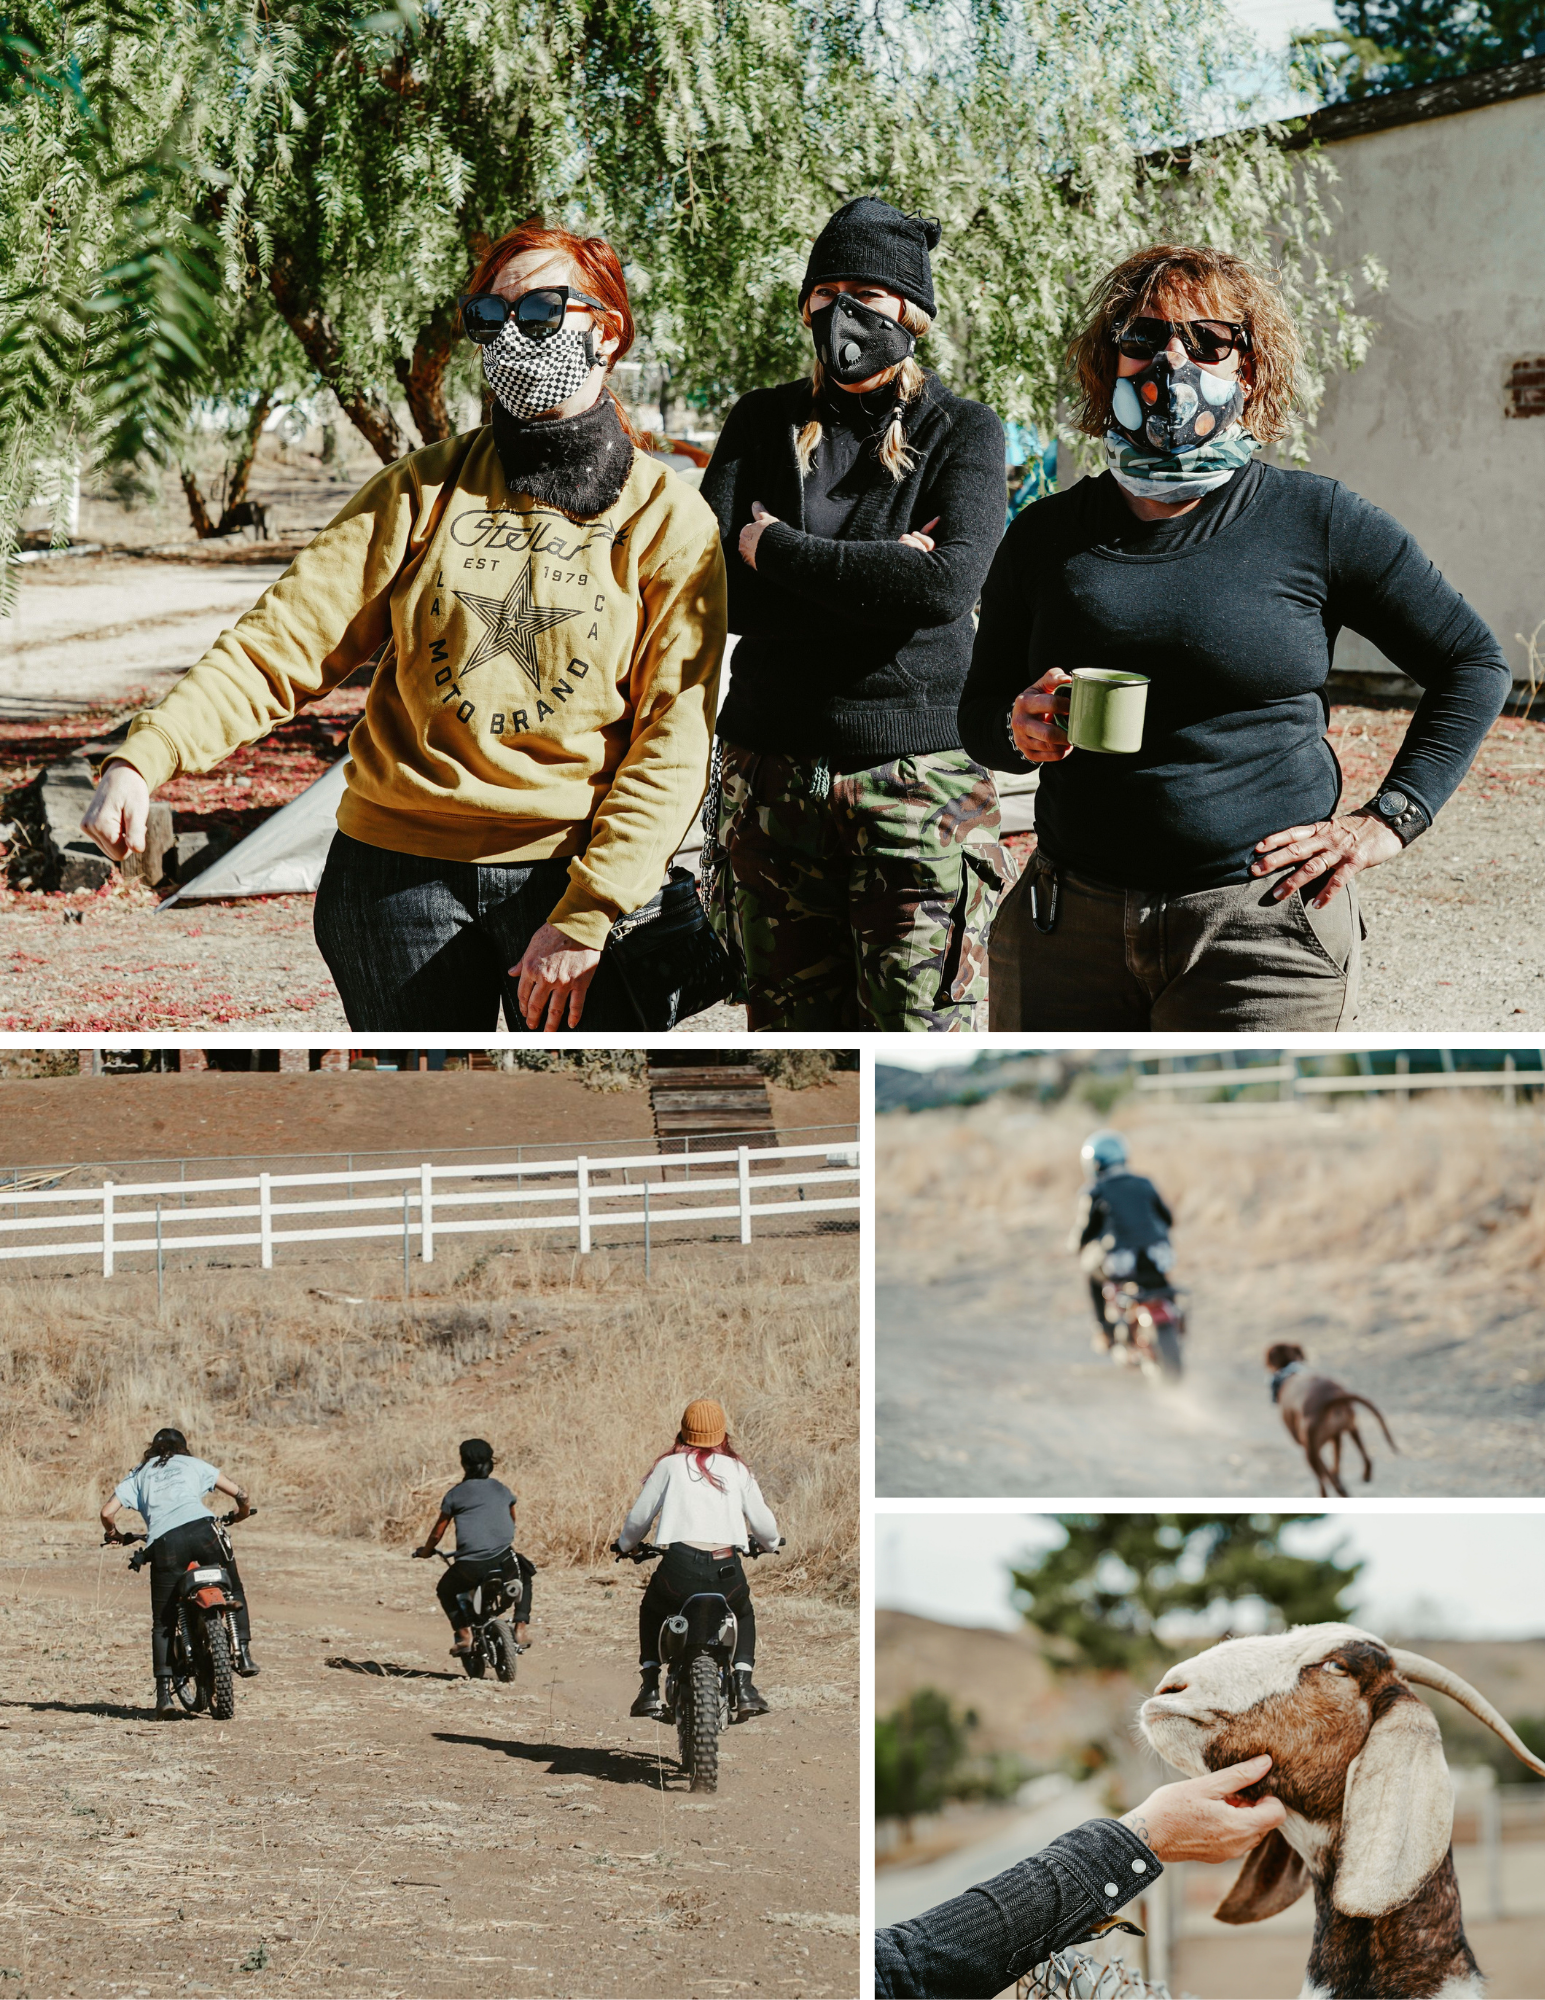 Female cyclists at the Stellar Moto Ranch